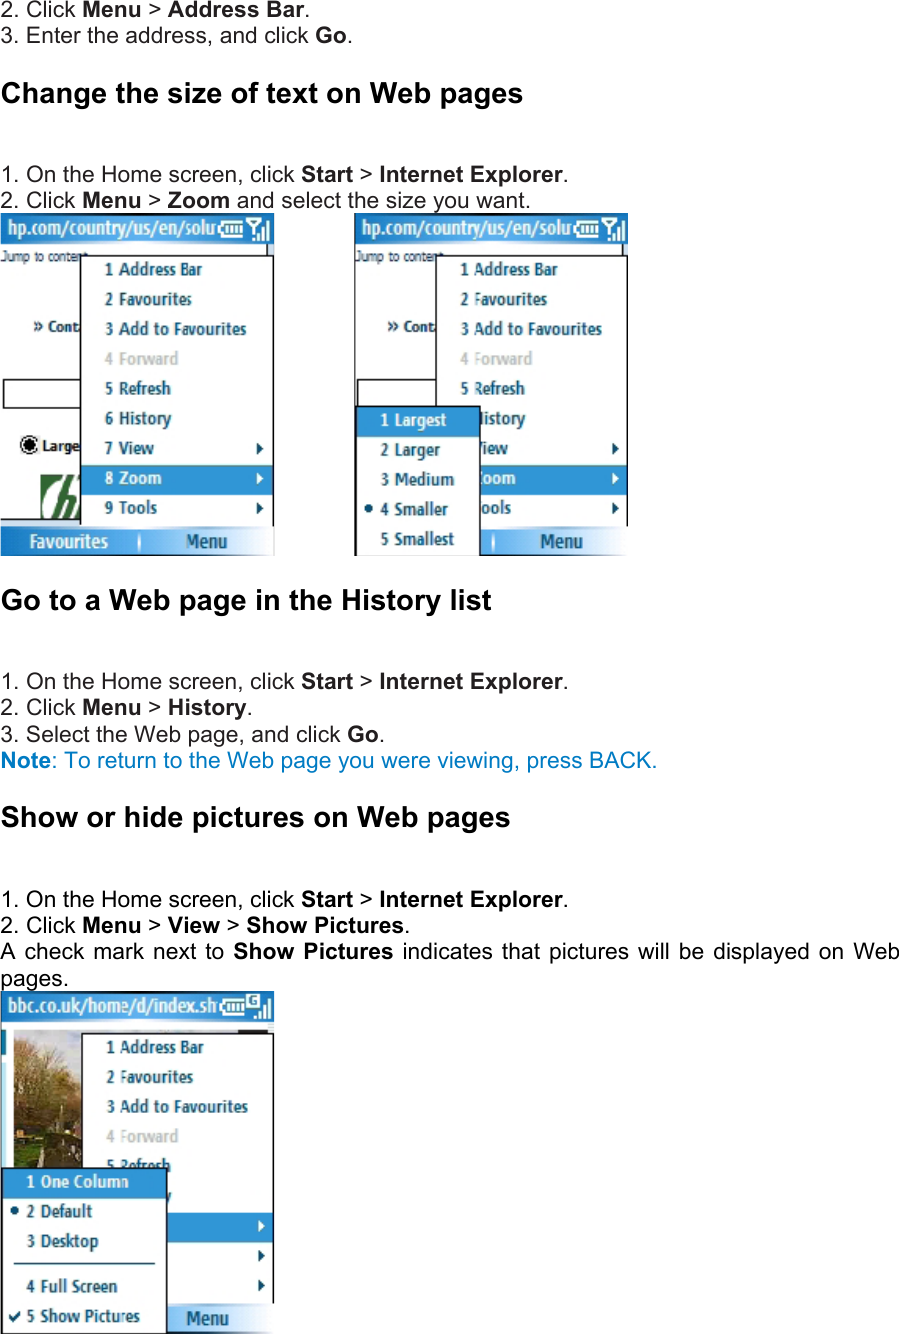 2. Click Menu &gt; Address Bar.  3. Enter the address, and click Go. Change the size of text on Web pages   1. On the Home screen, click Start &gt; Internet Explorer.  2. Click Menu &gt; Zoom and select the size you want.          Go to a Web page in the History list   1. On the Home screen, click Start &gt; Internet Explorer.  2. Click Menu &gt; History.  3. Select the Web page, and click Go.  Note: To return to the Web page you were viewing, press BACK. Show or hide pictures on Web pages   1. On the Home screen, click Start &gt; Internet Explorer.  2. Click Menu &gt; View &gt; Show Pictures.  A check mark next to Show Pictures indicates that pictures will be displayed on Web pages.   